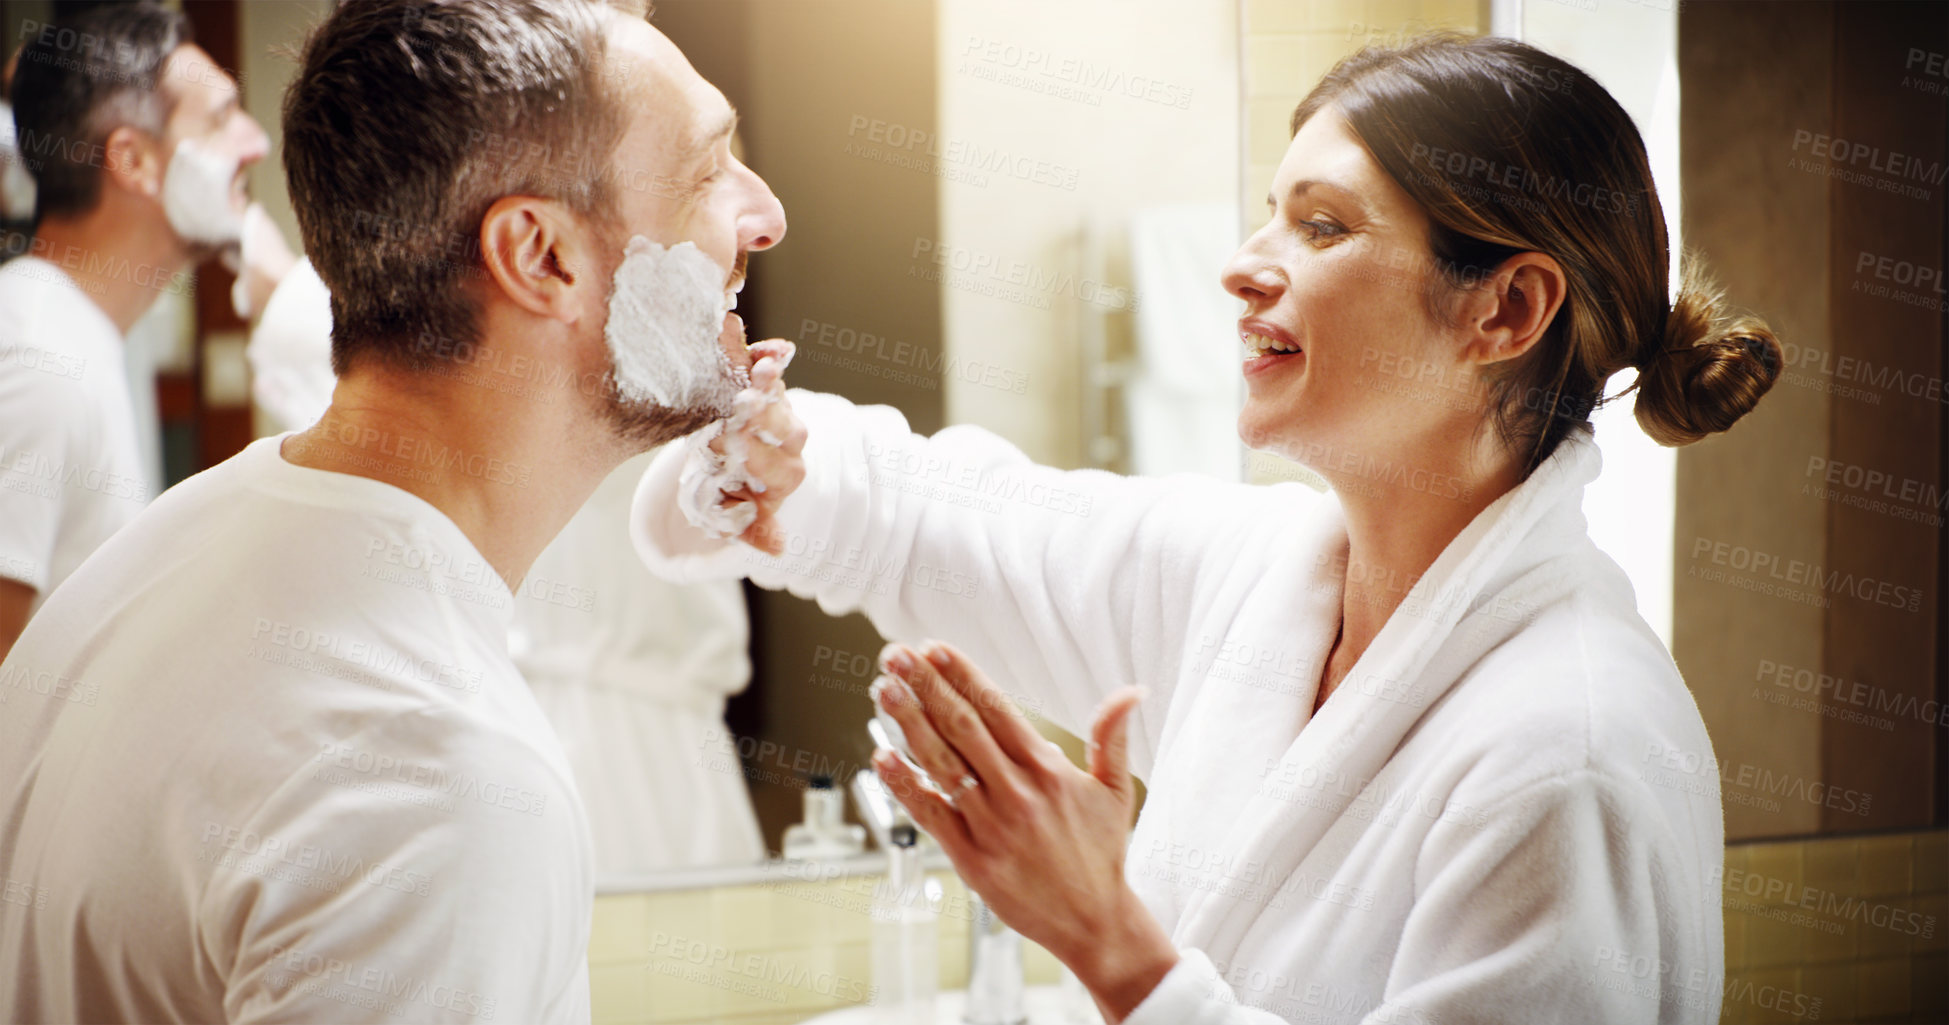 Buy stock photo Shot of a woman applying shaving cream to her husband's face in the bathroom at home